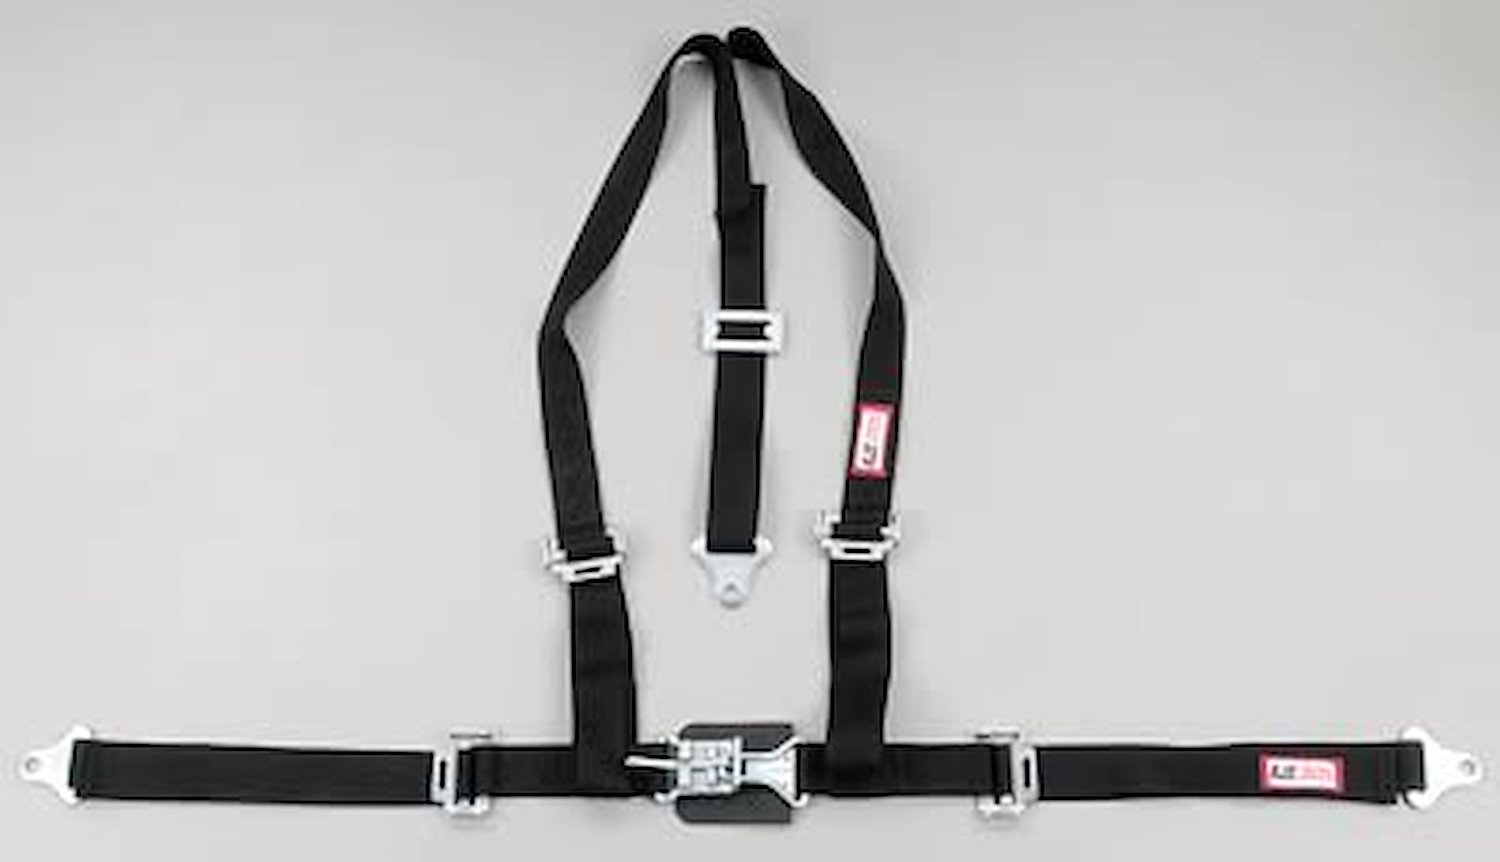 NON-SFI L&L HARNESS 2 PULL UP Lap Belt SNAP SEWN IN 2 S.H. INDIVIDUAL FLOOR Mount w/STERNUM STRAP WRAP/SNAP RED